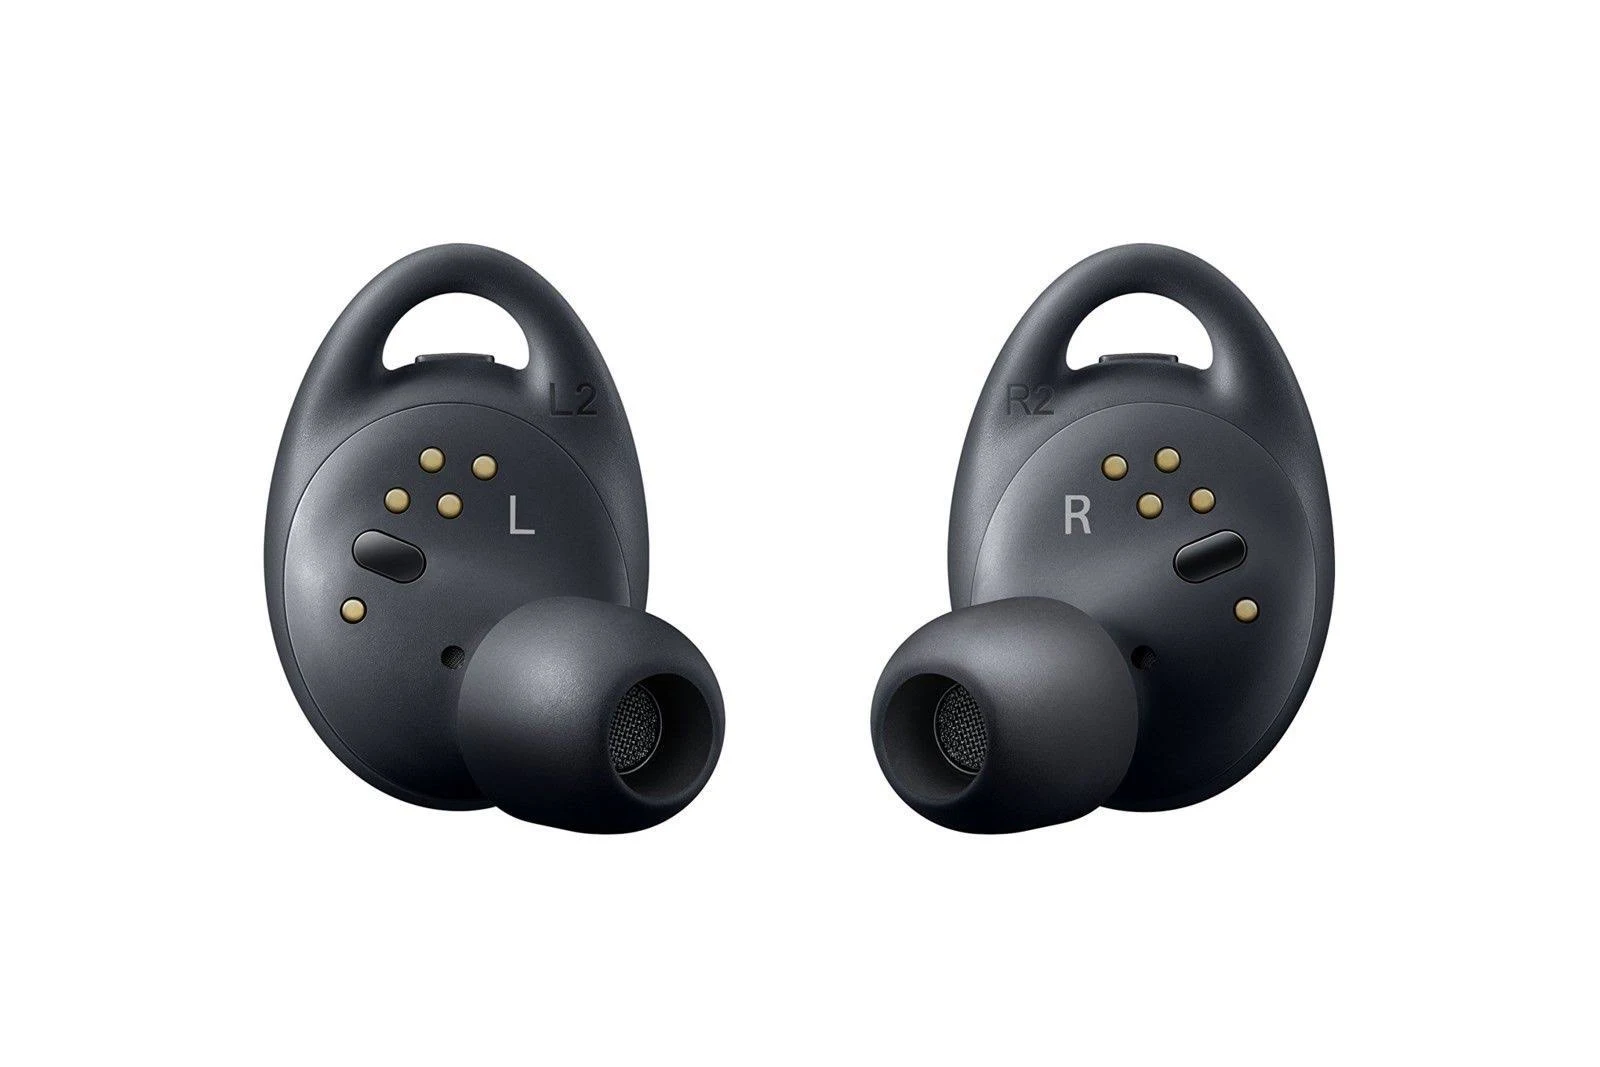 Samsung Gear IconX (2018 Edition) Bluetooth Cord-free Fitness Earbuds, w/On-board 4Gb MP3 Player (US Version with Warranty) - Black